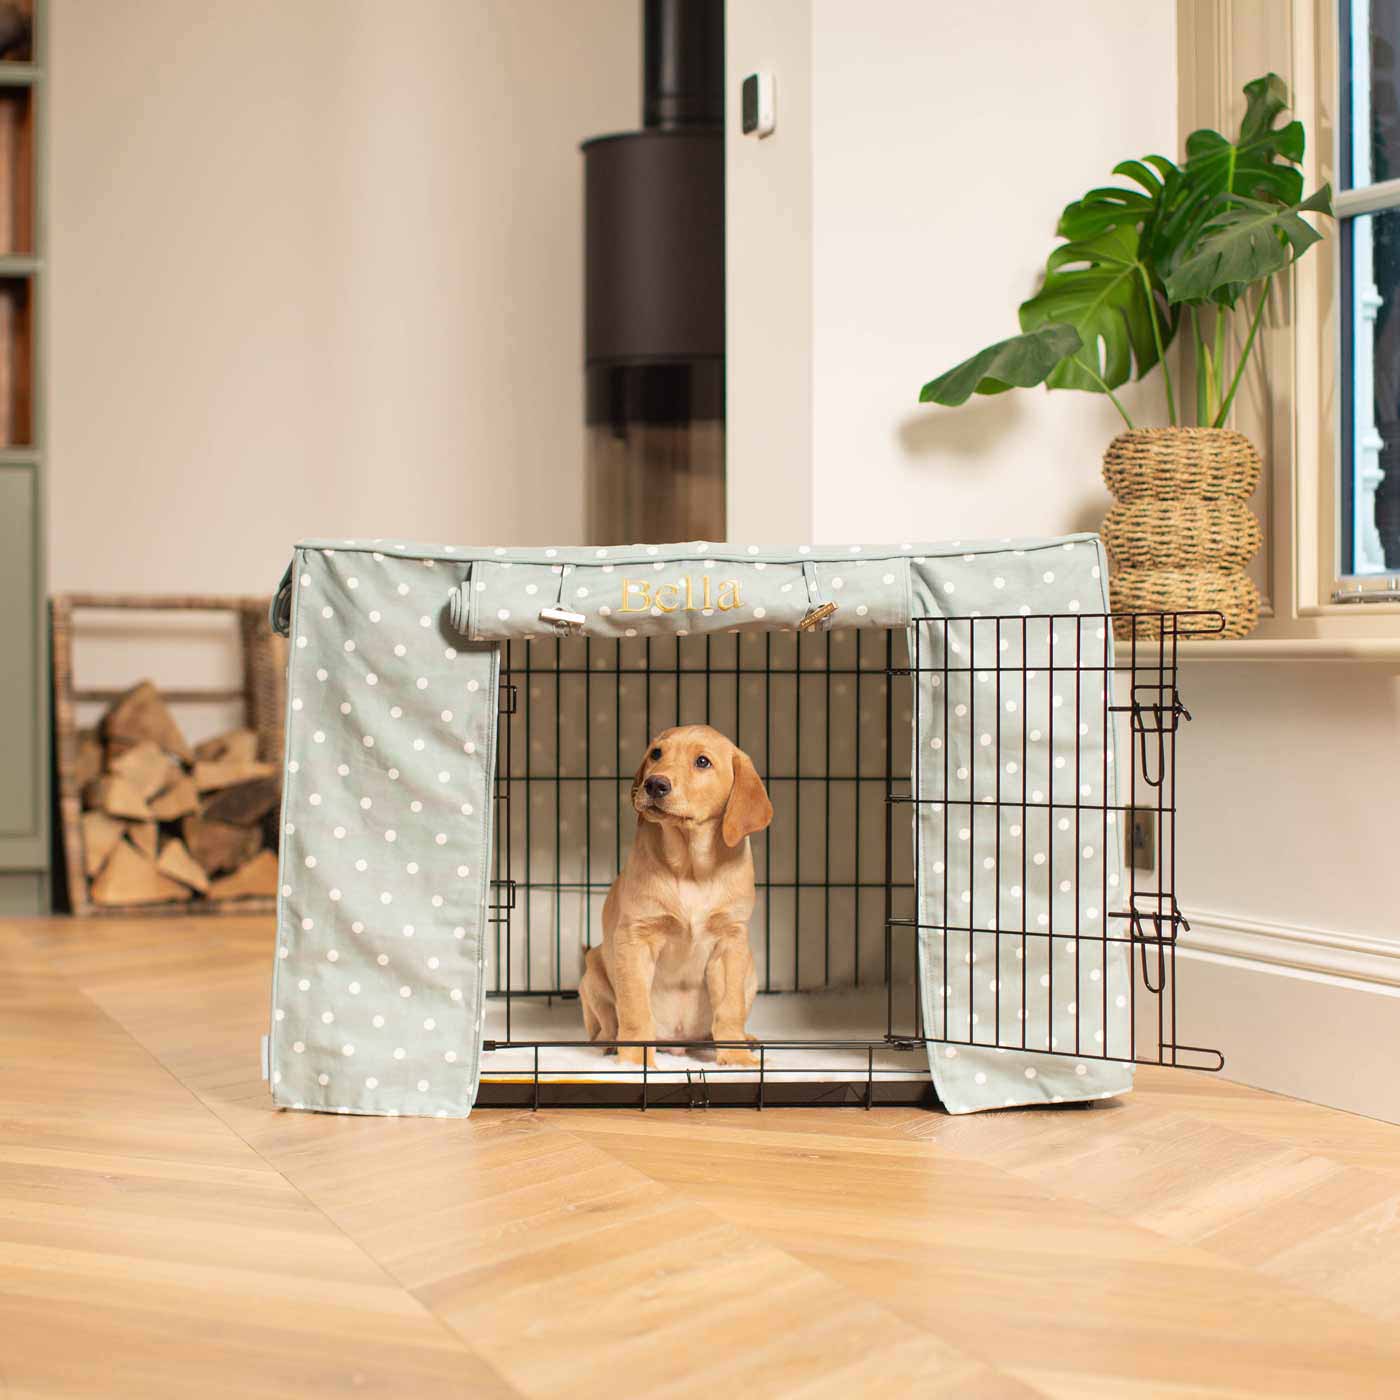 Luxury Black Dog Cage With Cage Cover, in Duck Egg Spot. The Perfect Dog Crate For The Ultimate Naptime, Available Now to Personalize at Lords & Labradors US